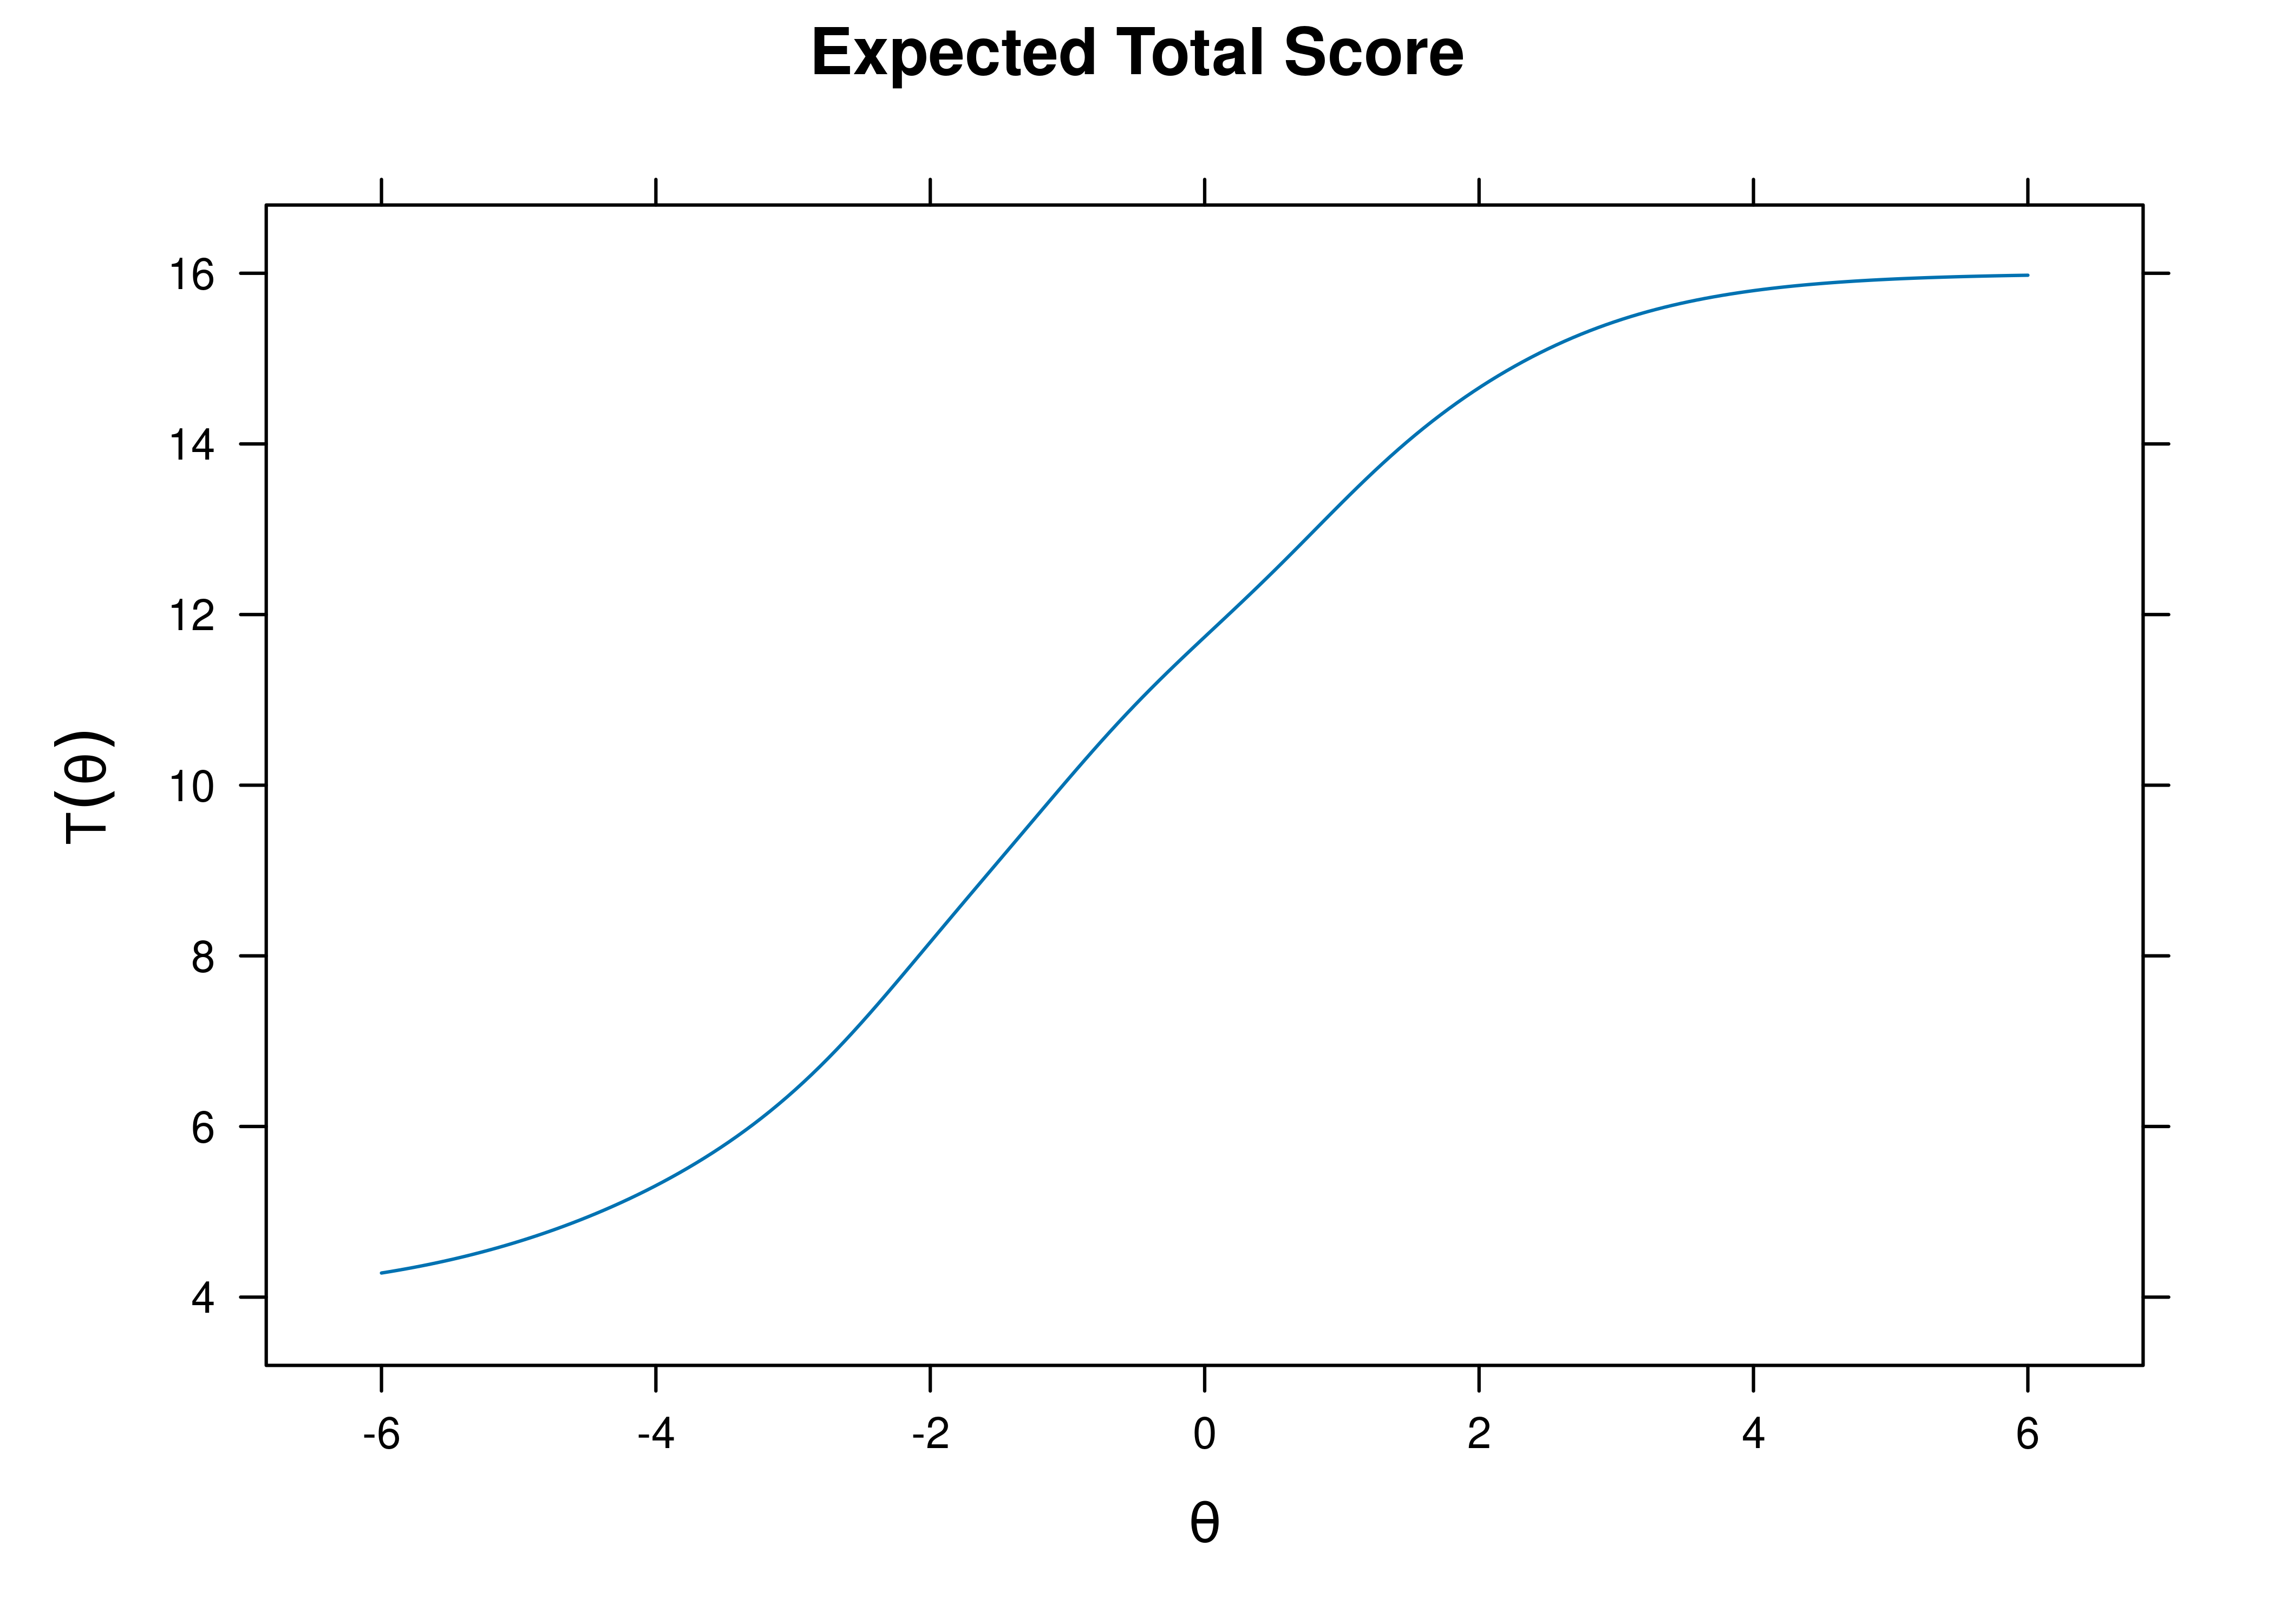 Test Characteristic Curve From Graded Response Model.